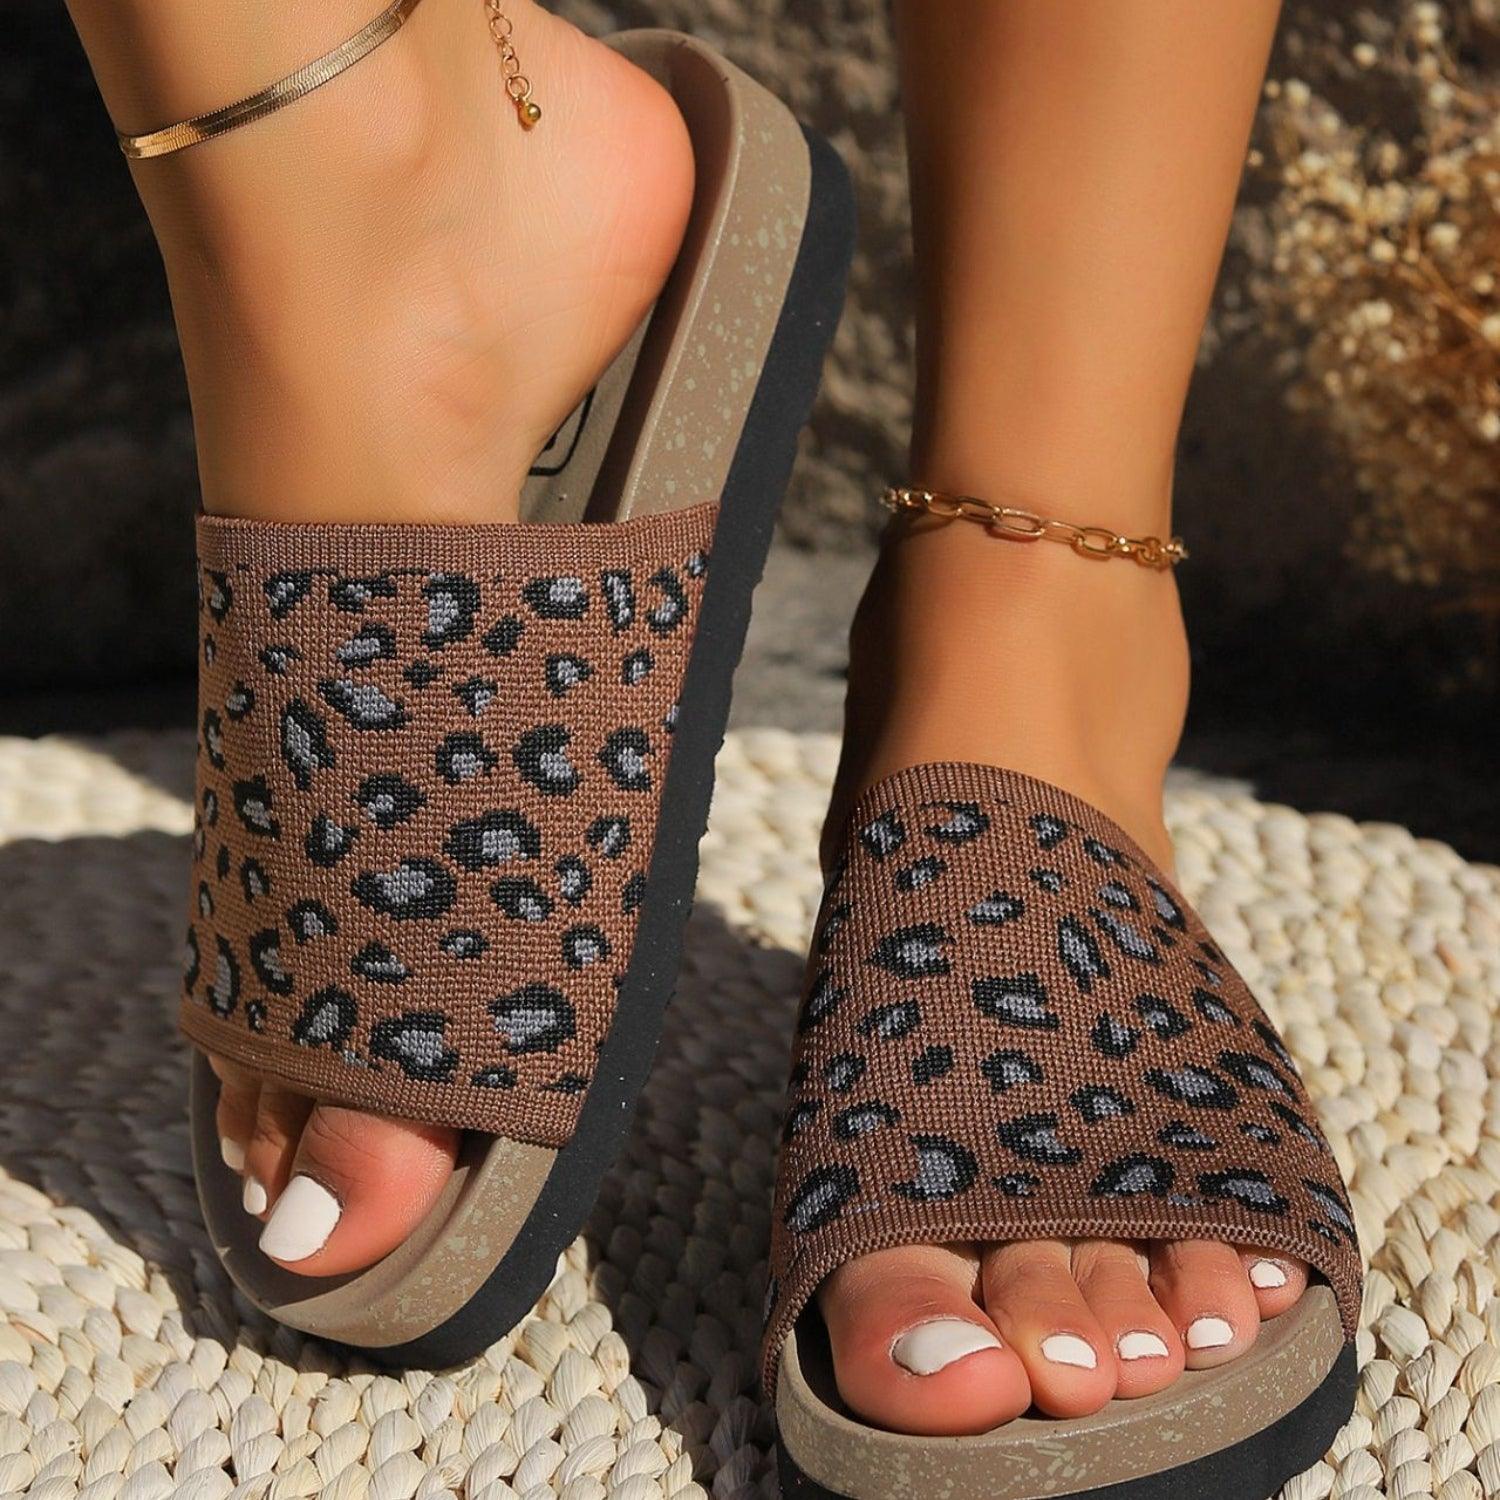 a close up of a person's feet wearing sandals